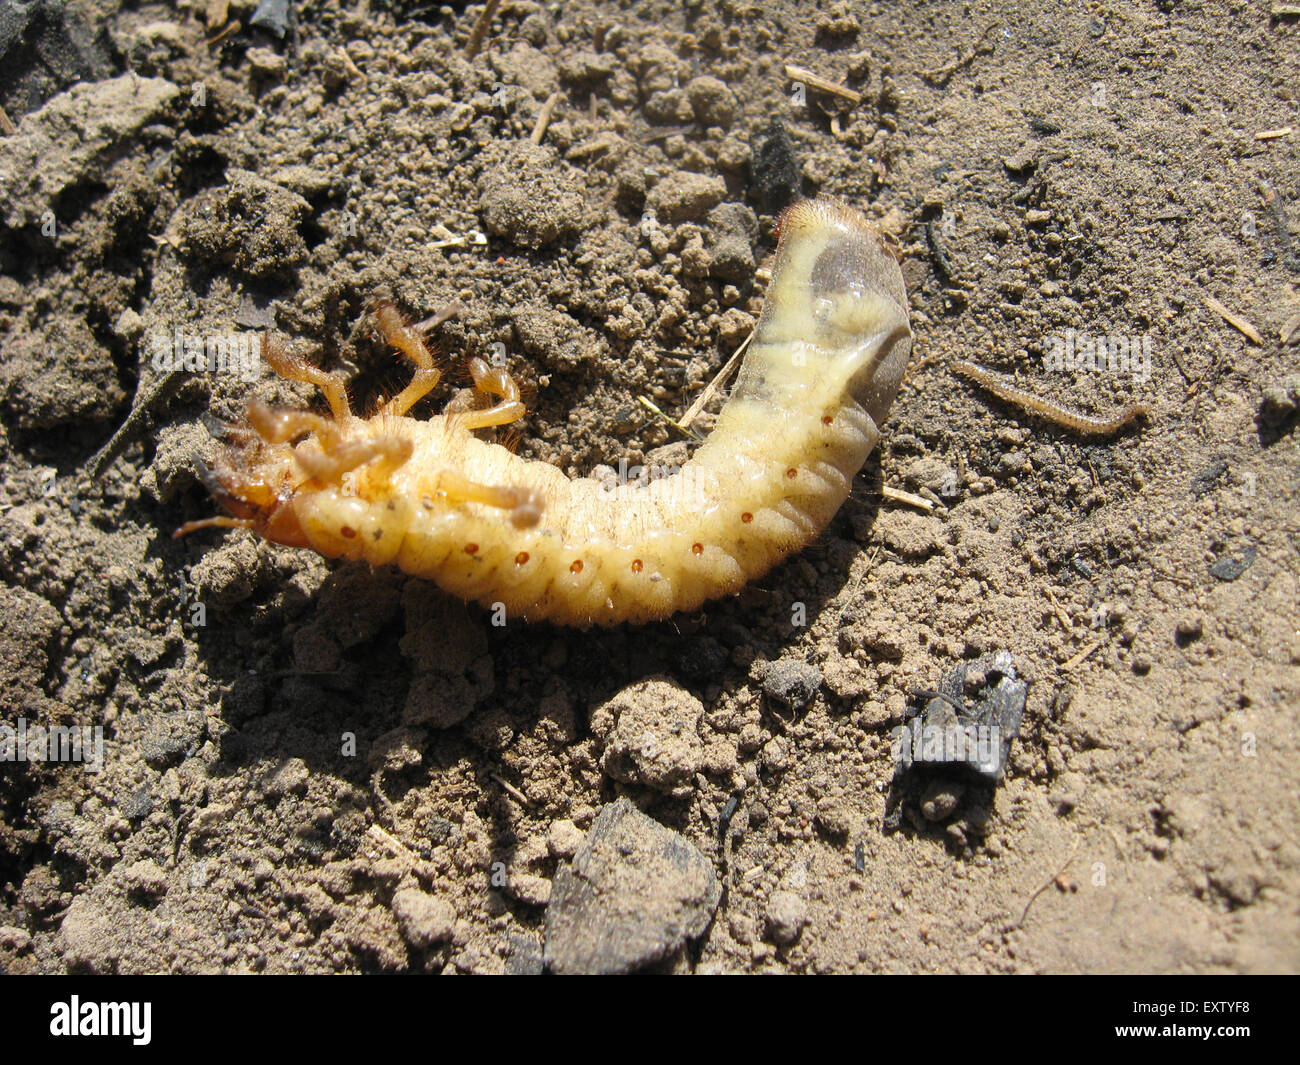 larva of may-bug on laying on the ground Stock Photo